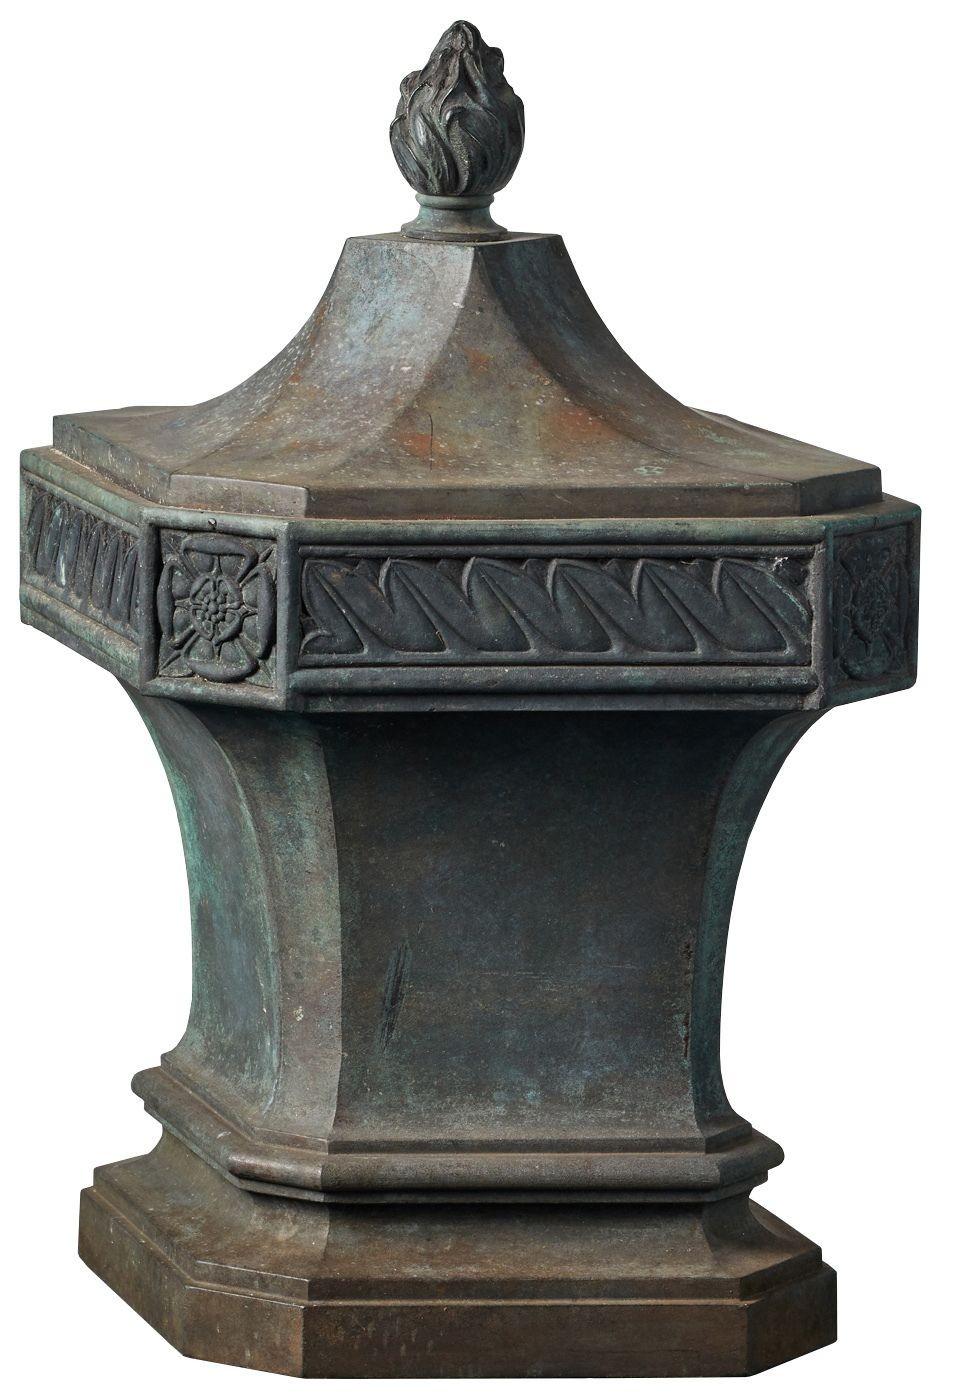 Antique shaped bronze finial. The lozenge shaped finial features a patinated Bronze finish with a flame styled cap. There is stylised foliage and Tudor rose decoration.